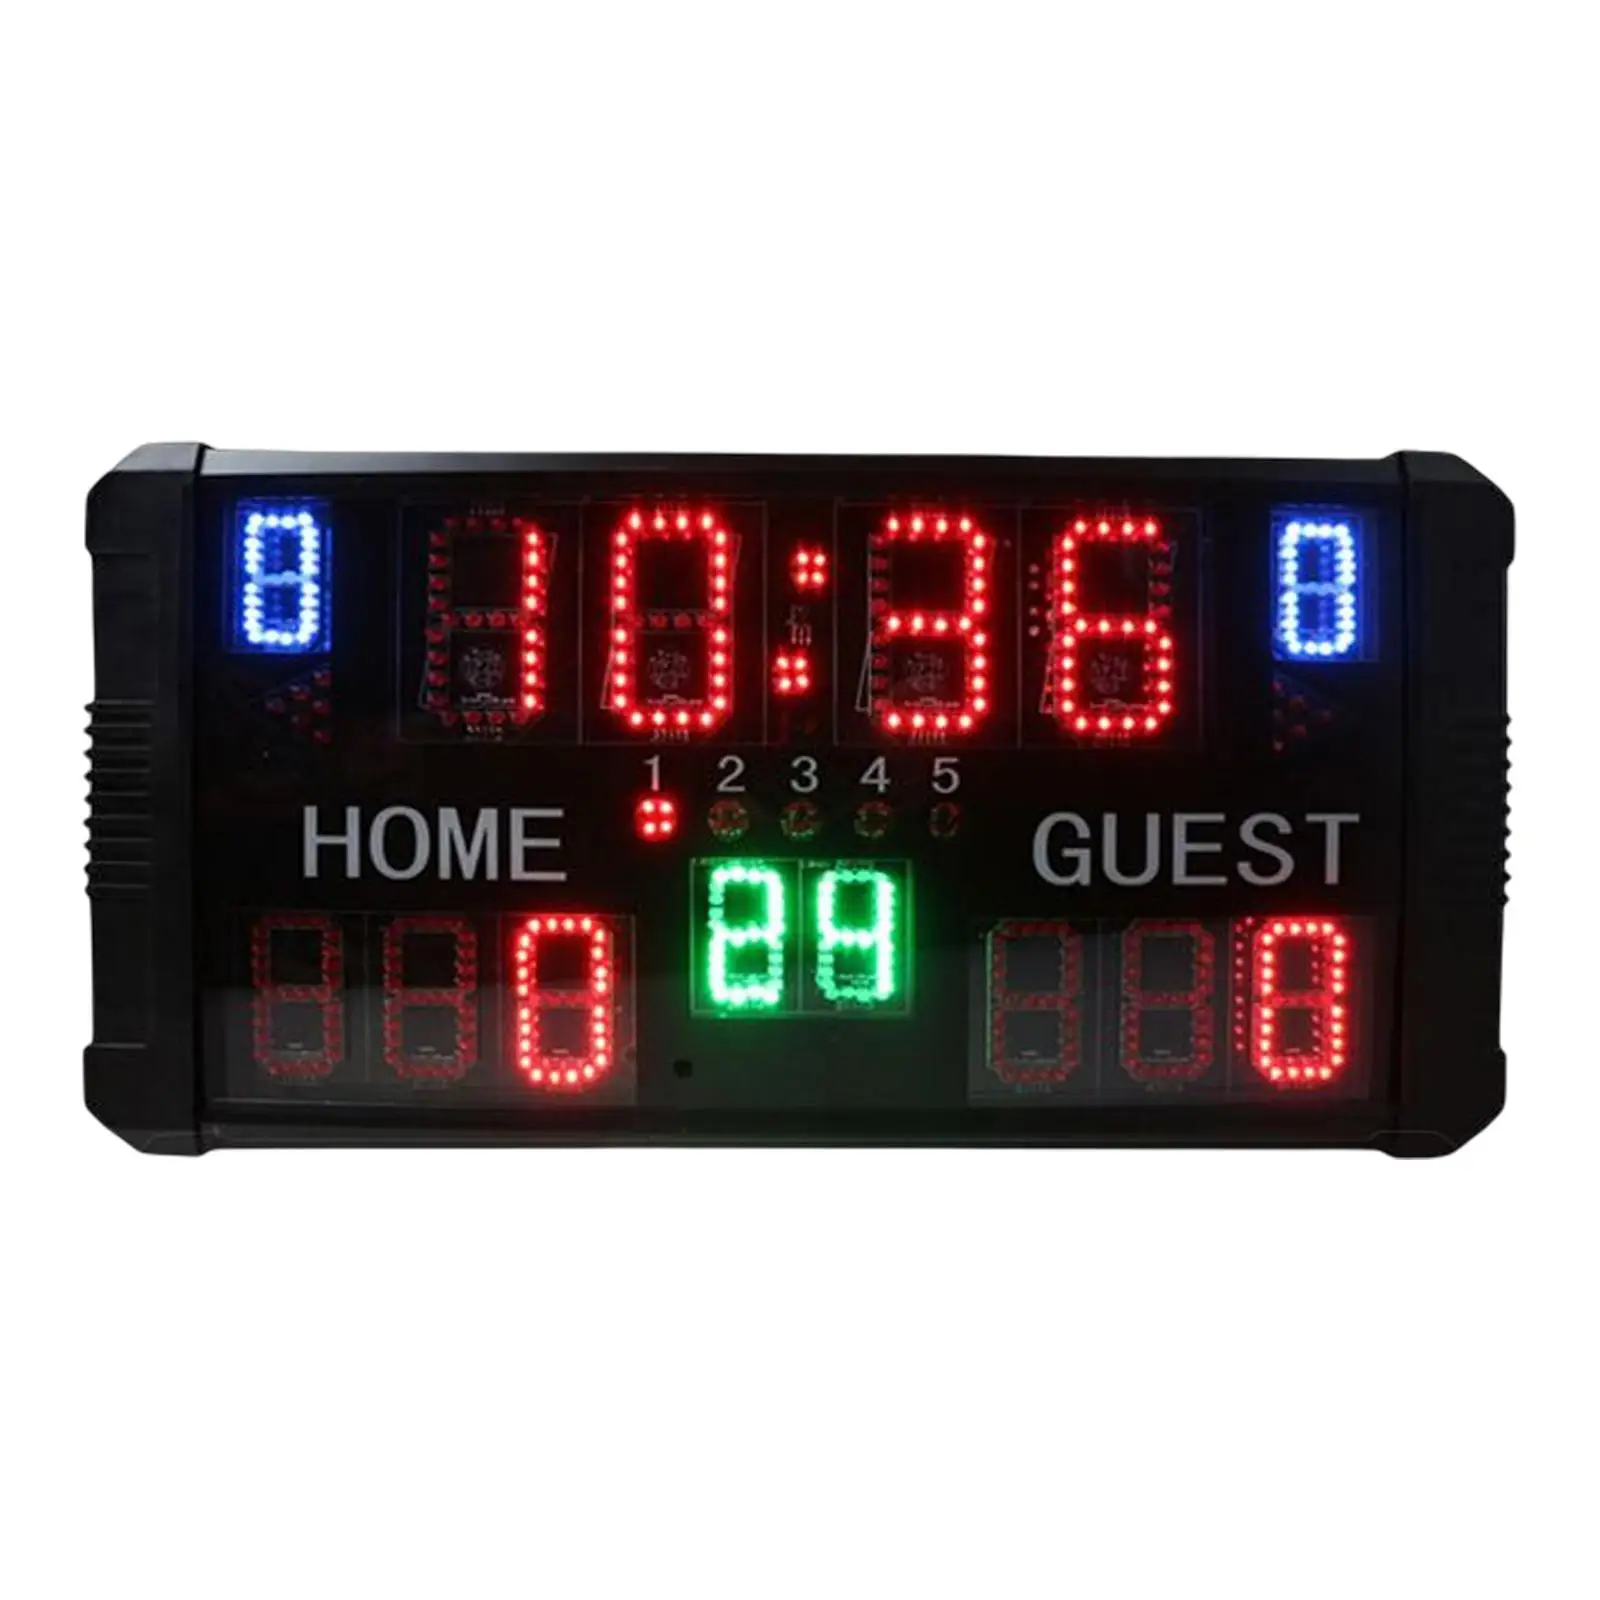 Professional Indoor Basketball Scoreboard 24 Seconds Timing Innings Electronic Digital Scoreboard Score Clock for Games Boxing